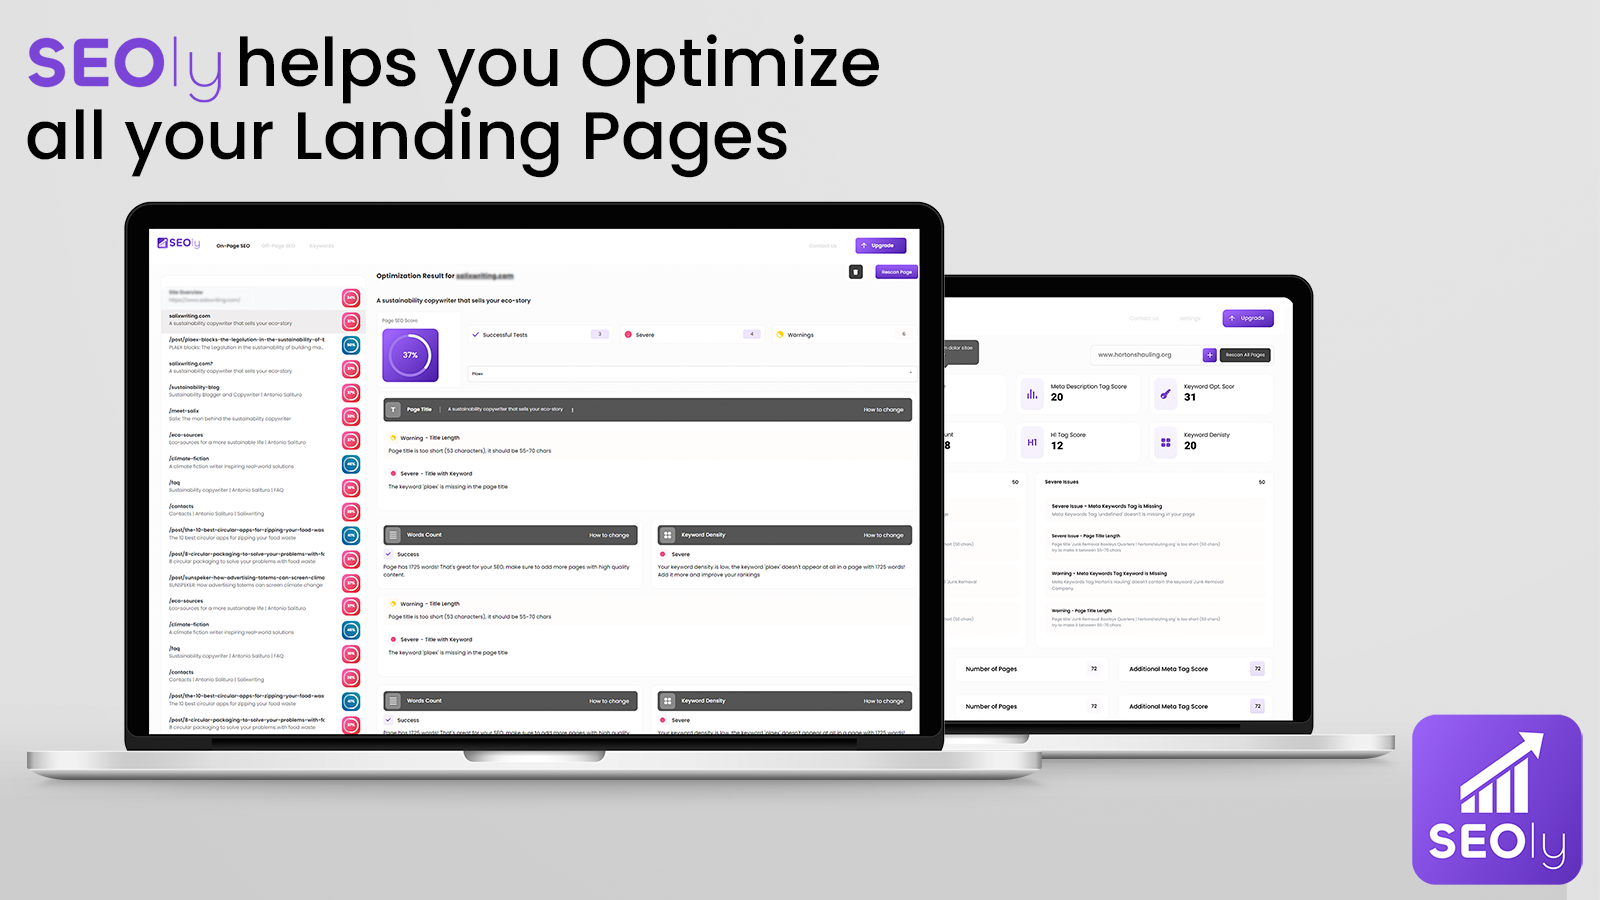 SEOly Helps you Optimize Your Landing Pages